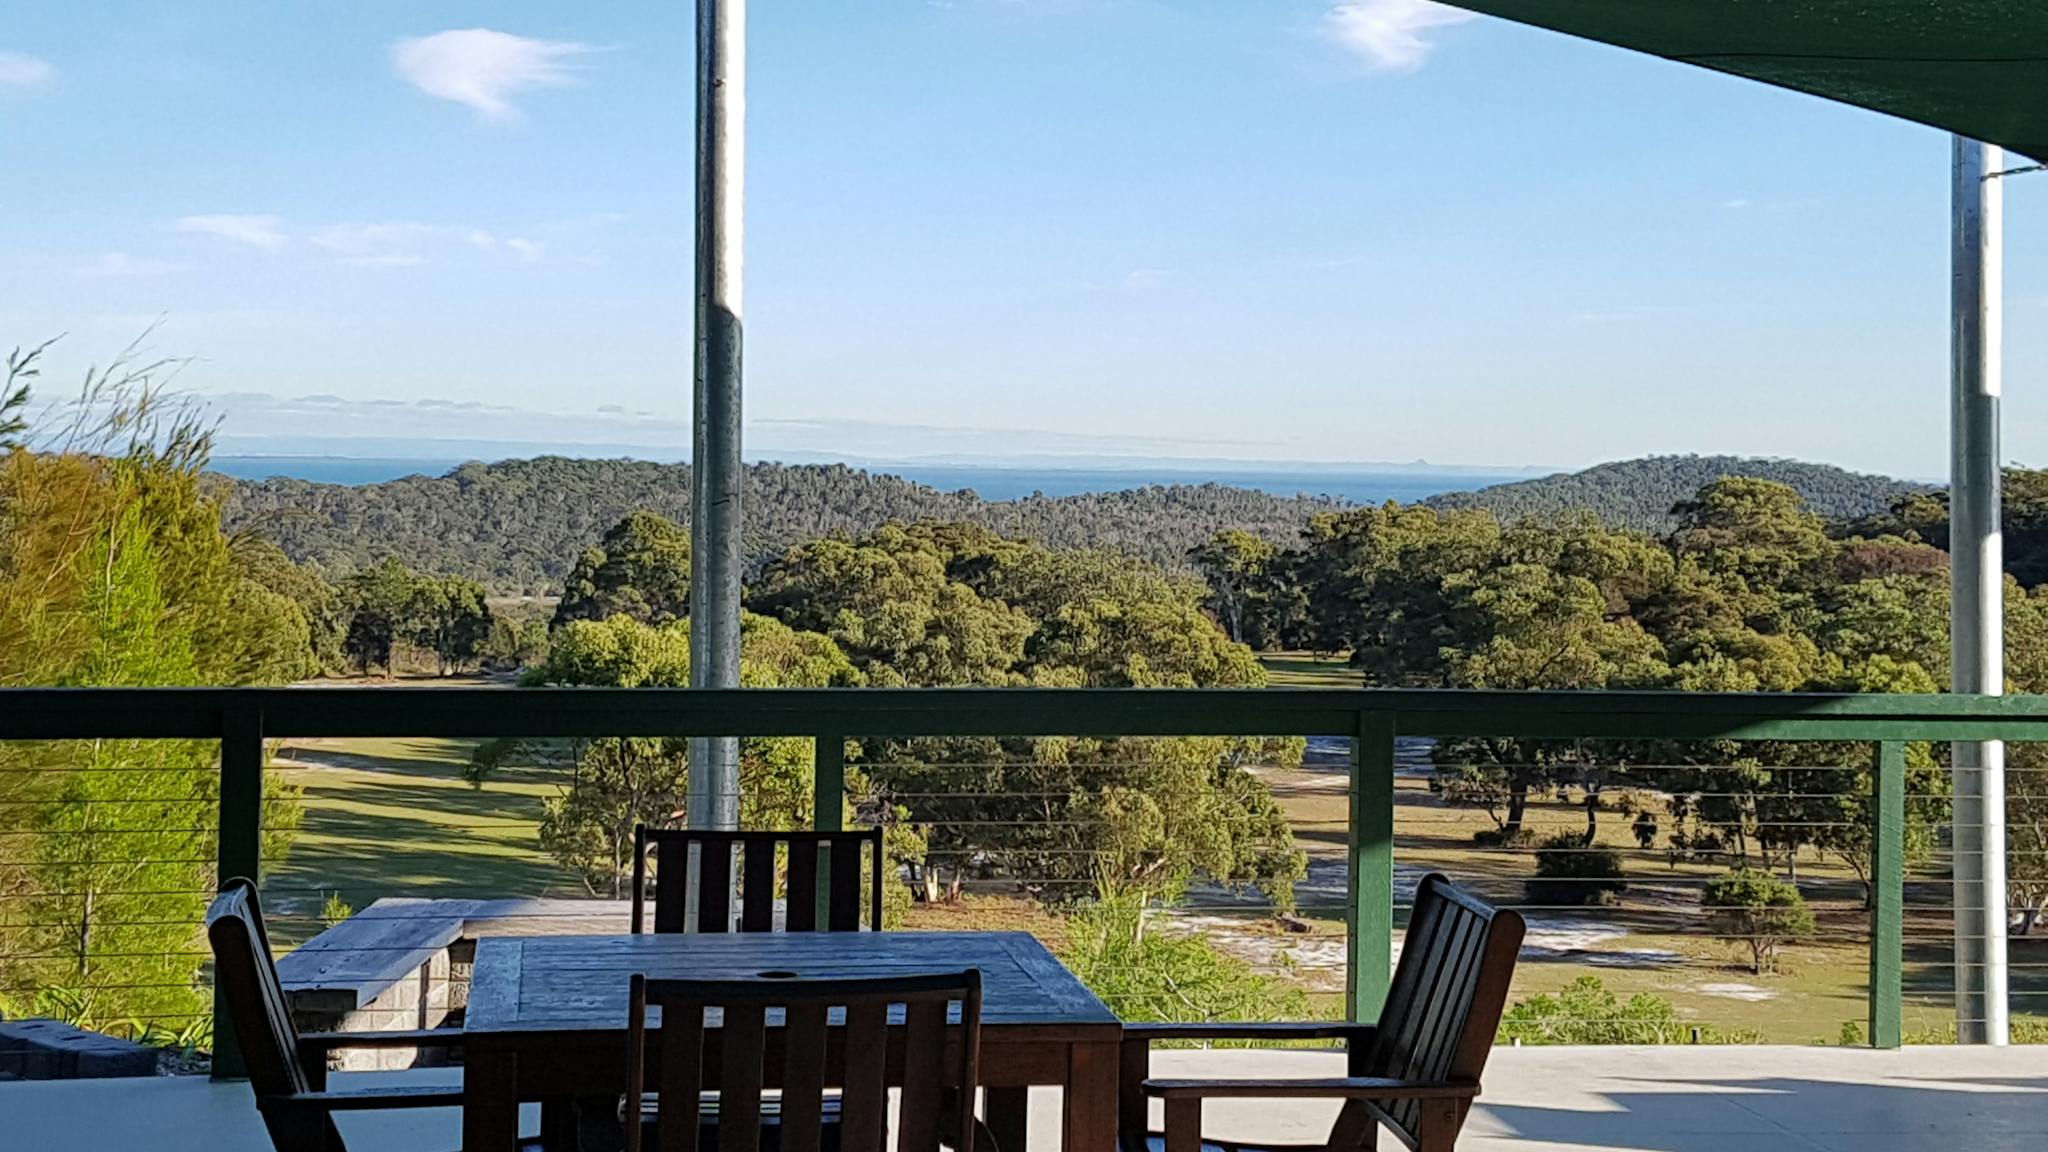 Sit back and enjoy the view across Moreton Bay to teh Glasshouse Mountains